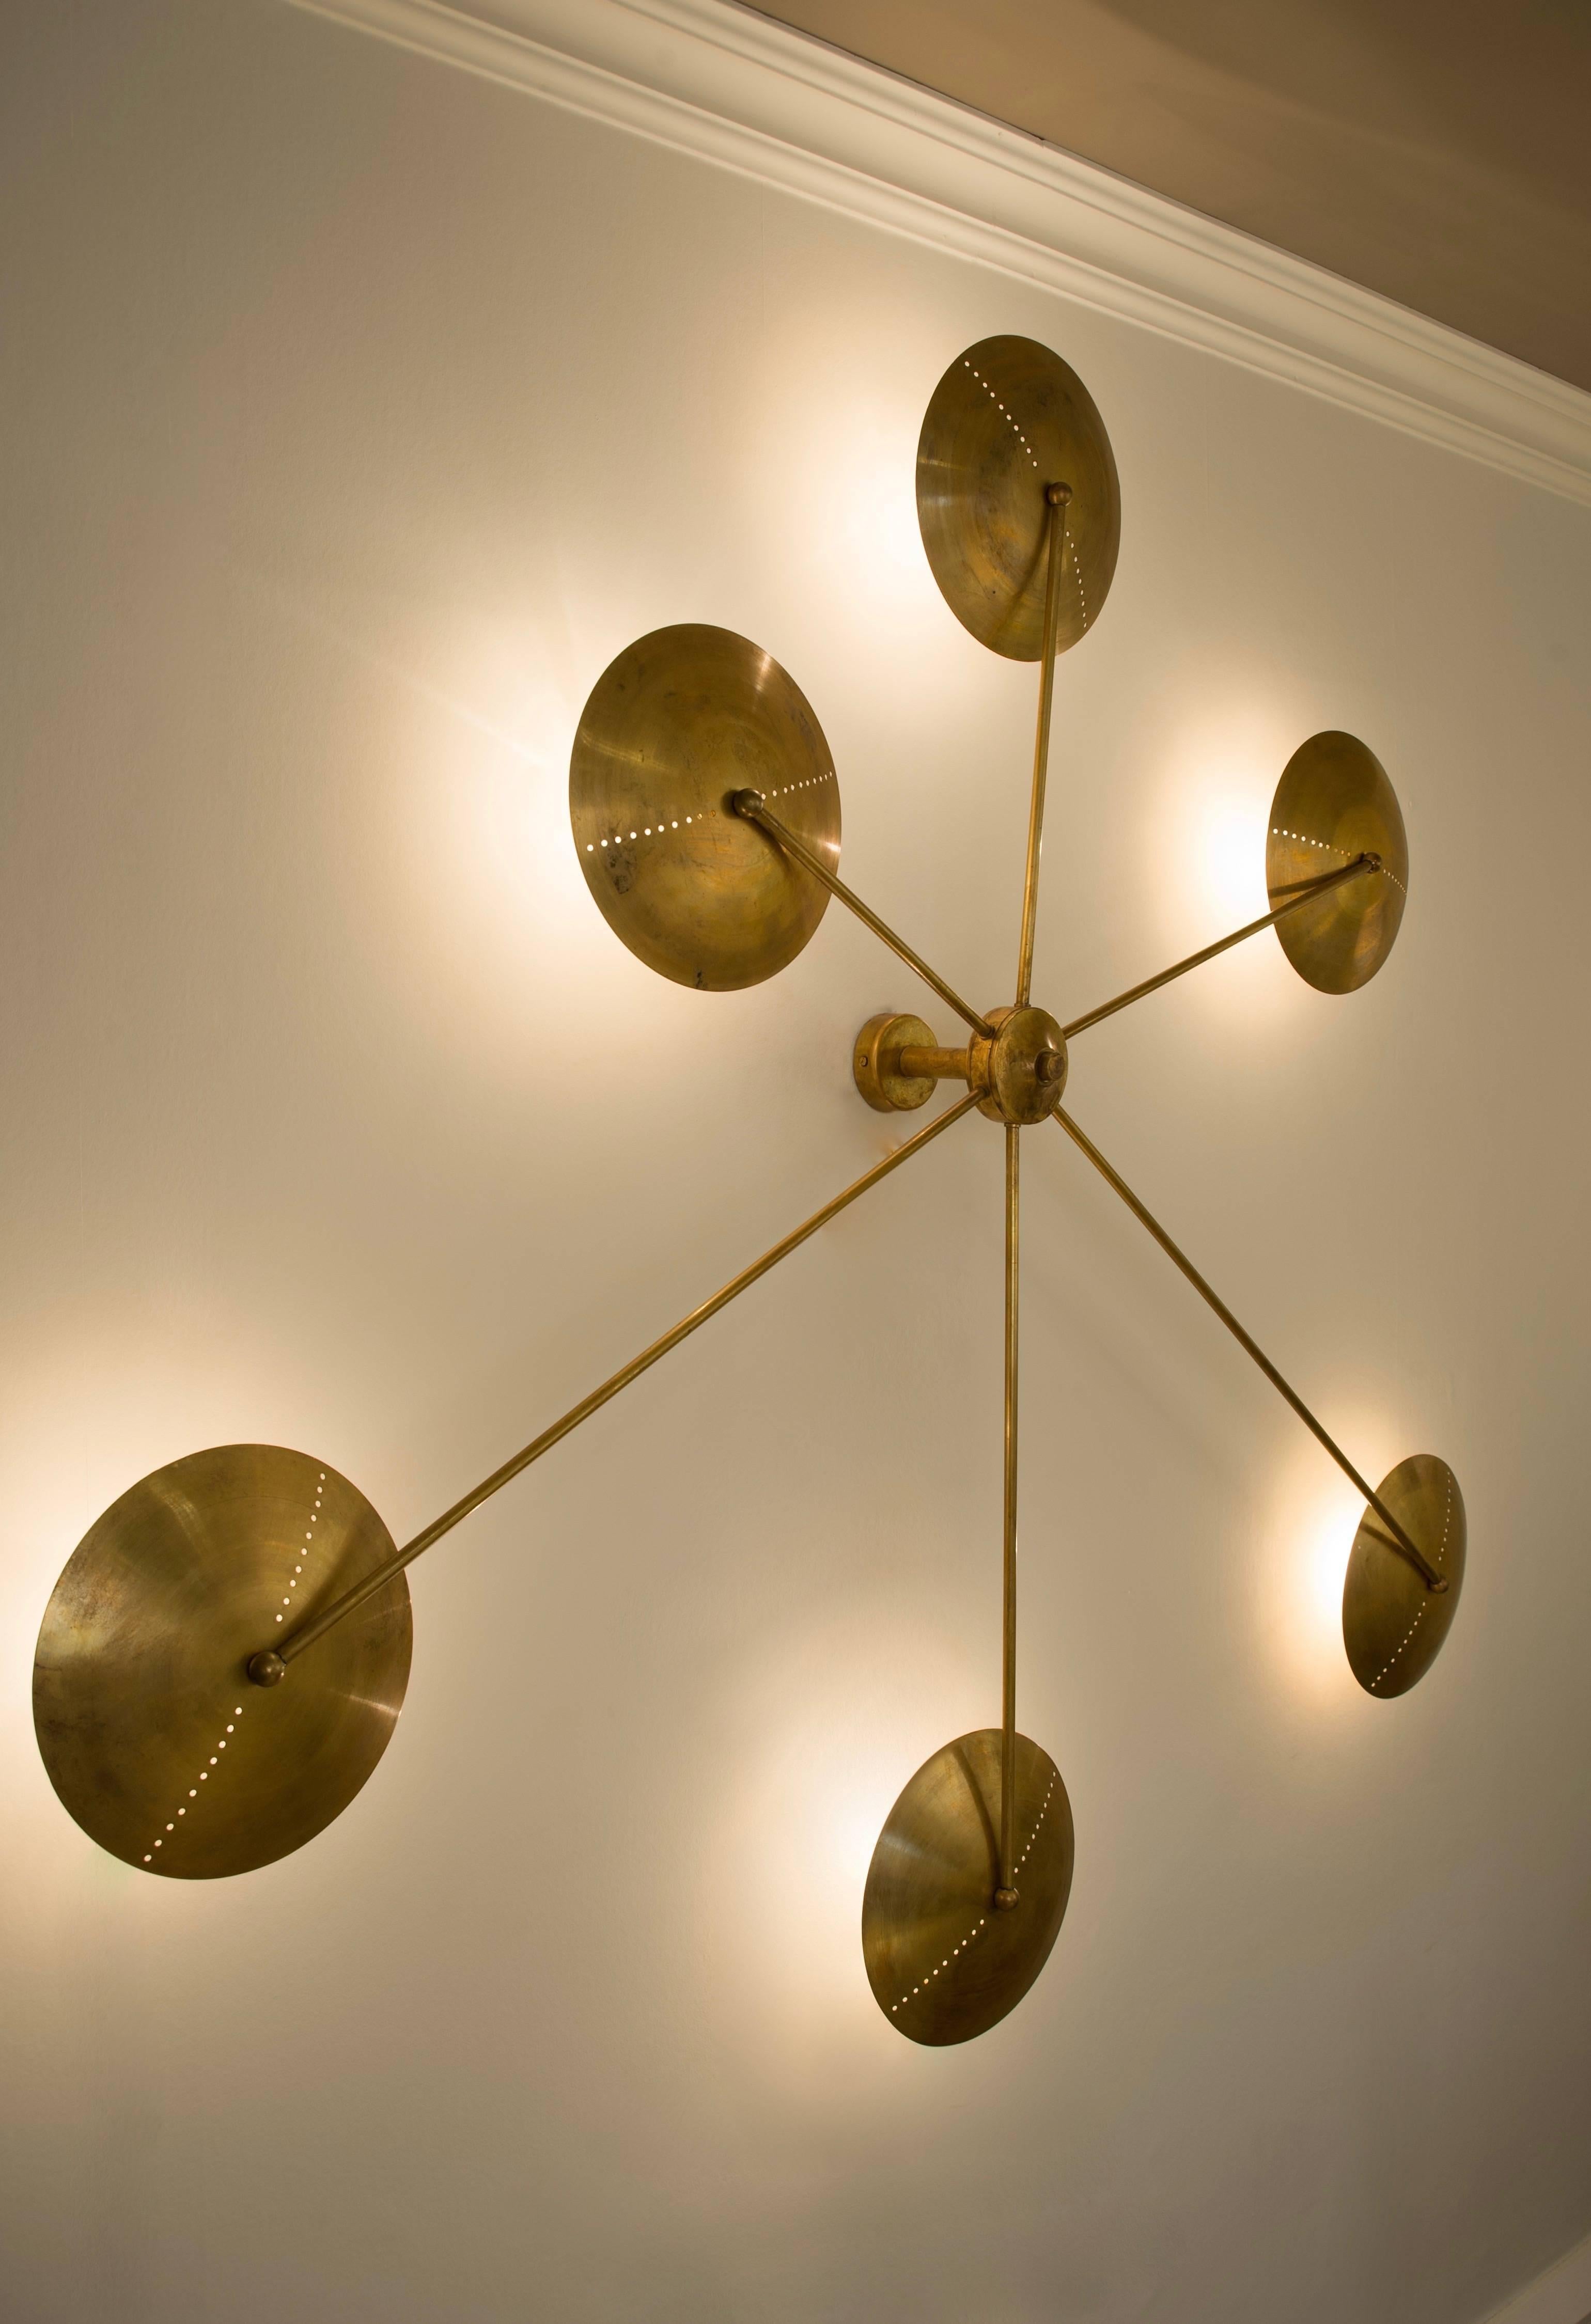 Made from brass this wall sconce can be assembled in various configurations to suit each interior. Dimensions are per assembly shown.

Can also be ceiling mounted.